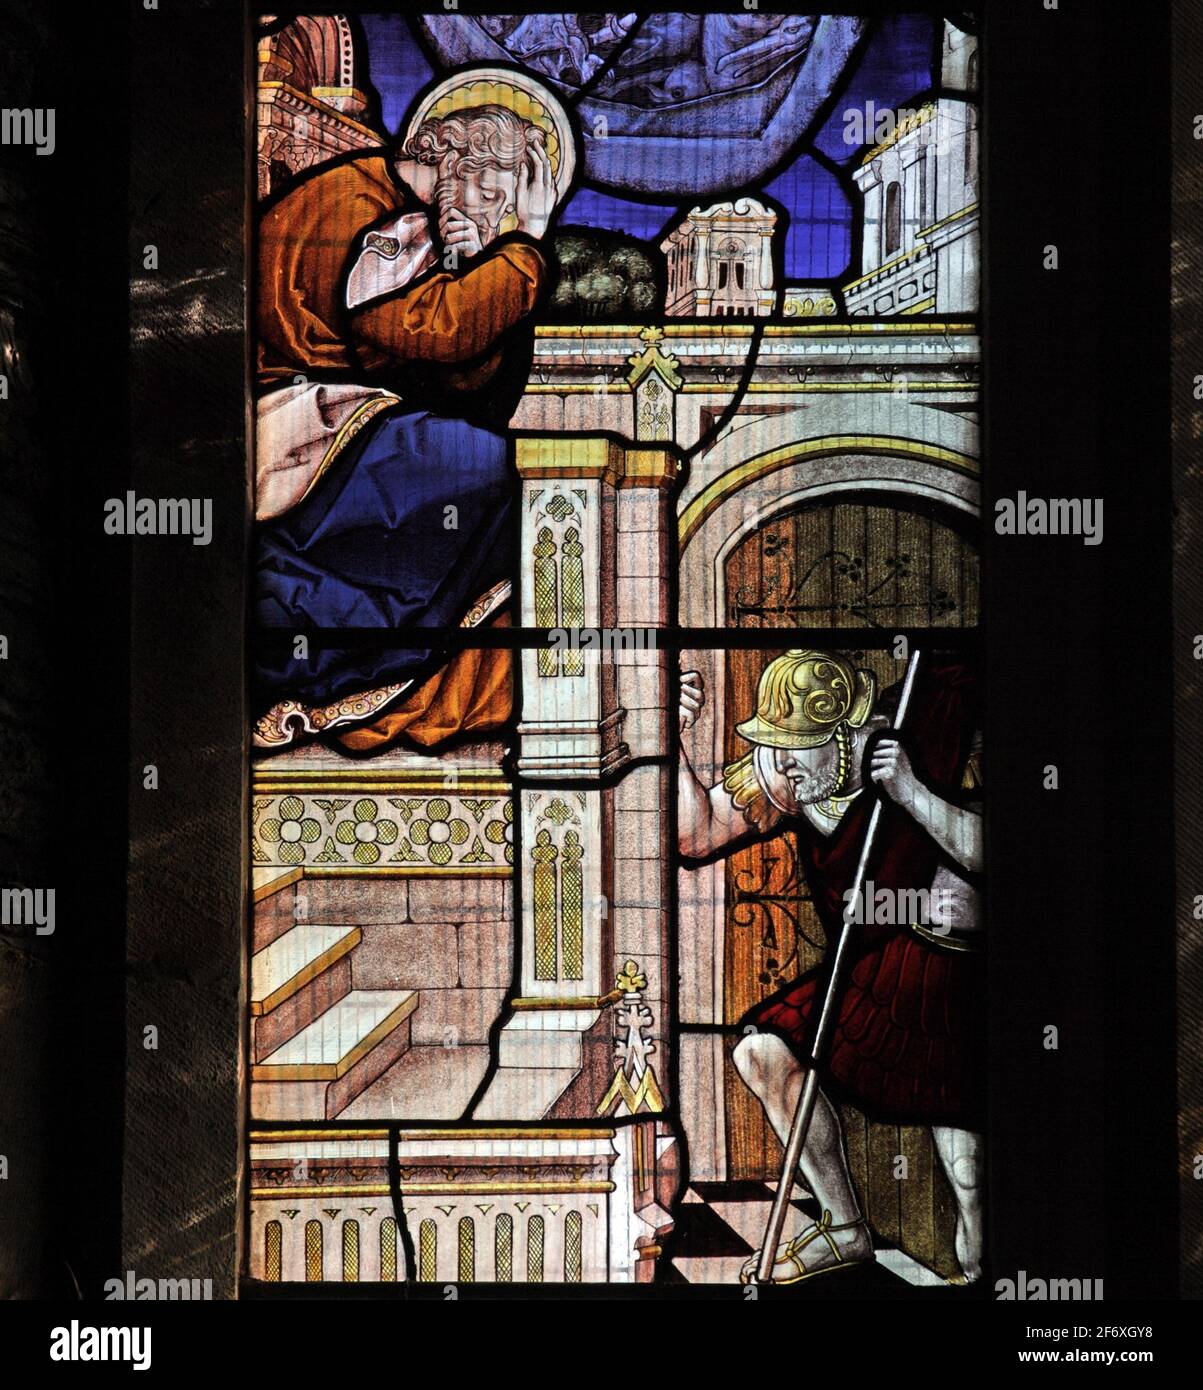 Detail of a stained glass window by Burlison & Grylls depicting The Story of Cornelius and Simon Peter (Acts 10:5), All Saints Church, Watermillock, Stock Photo